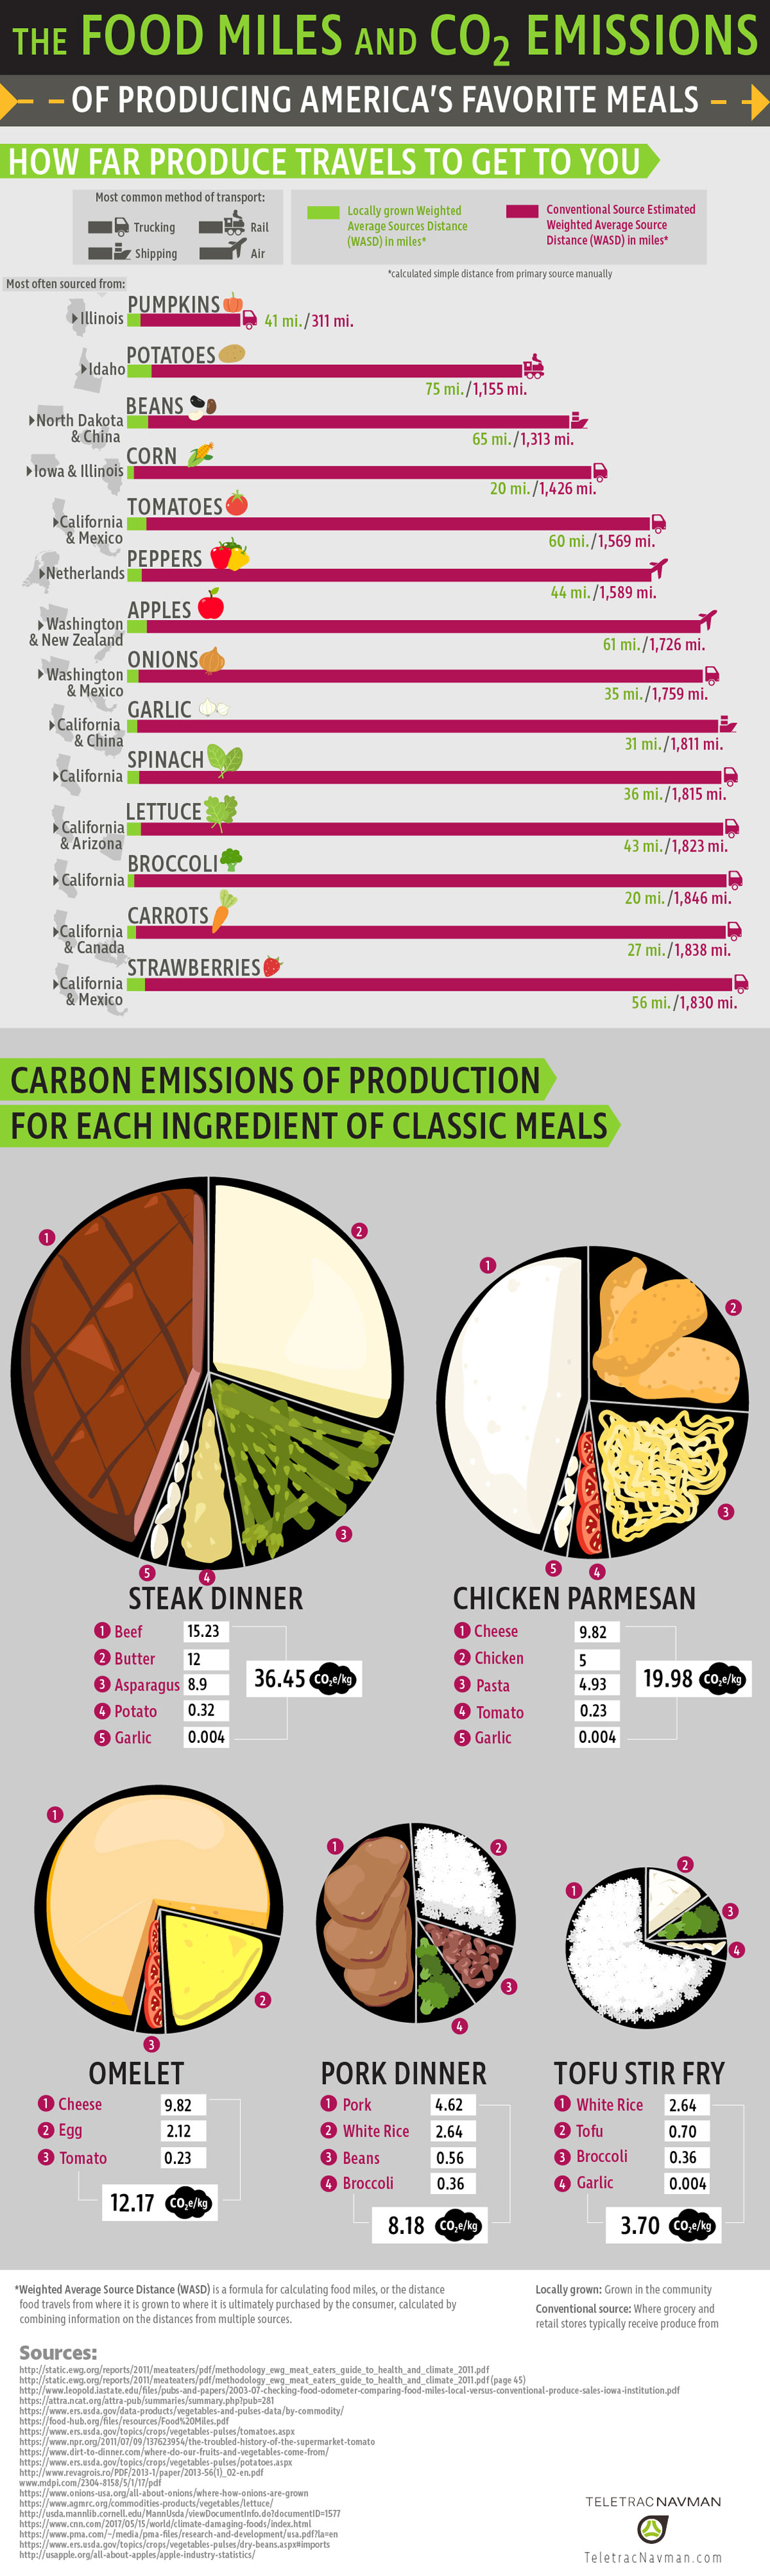 America’s Favorite Foods Measured in Food Miles and CO2 Emission - Infographic